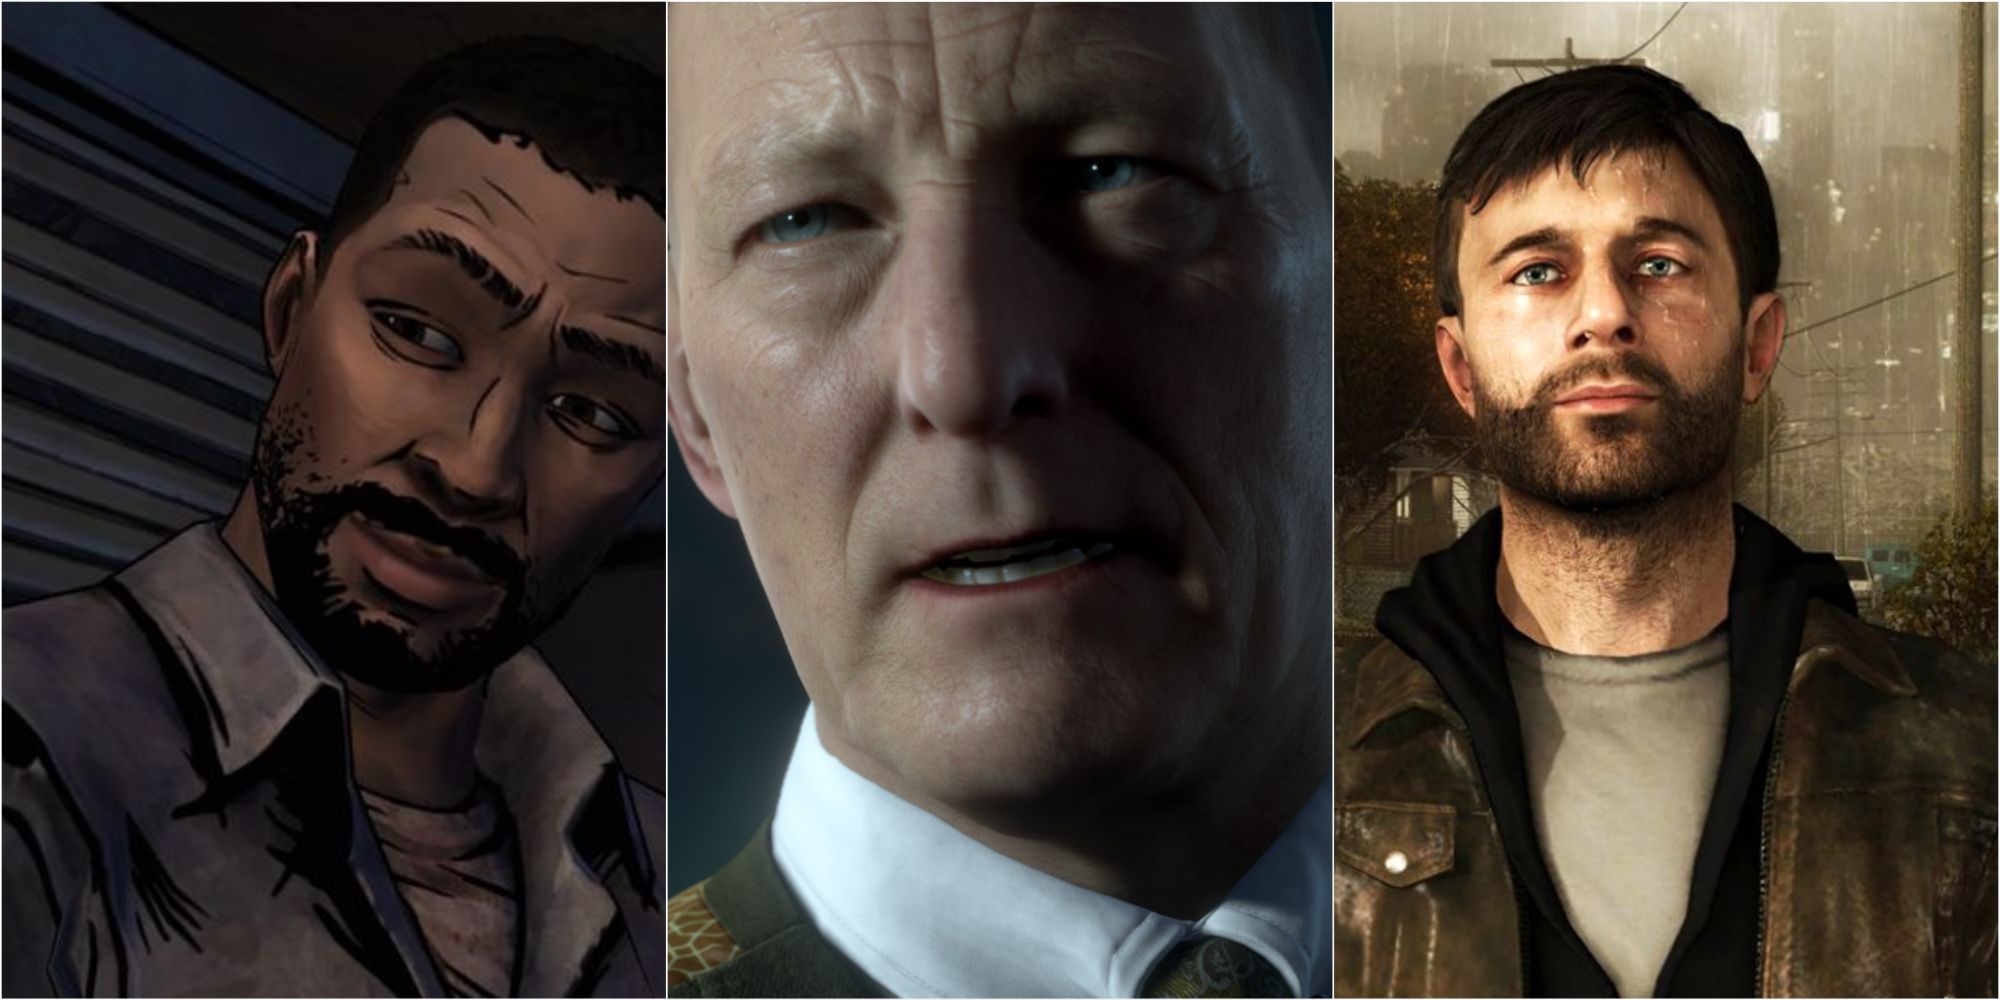 Games To Play If You Like Man of Medan Featured Split Image Walking Dead, Man Of Medan, and Heavy Rain